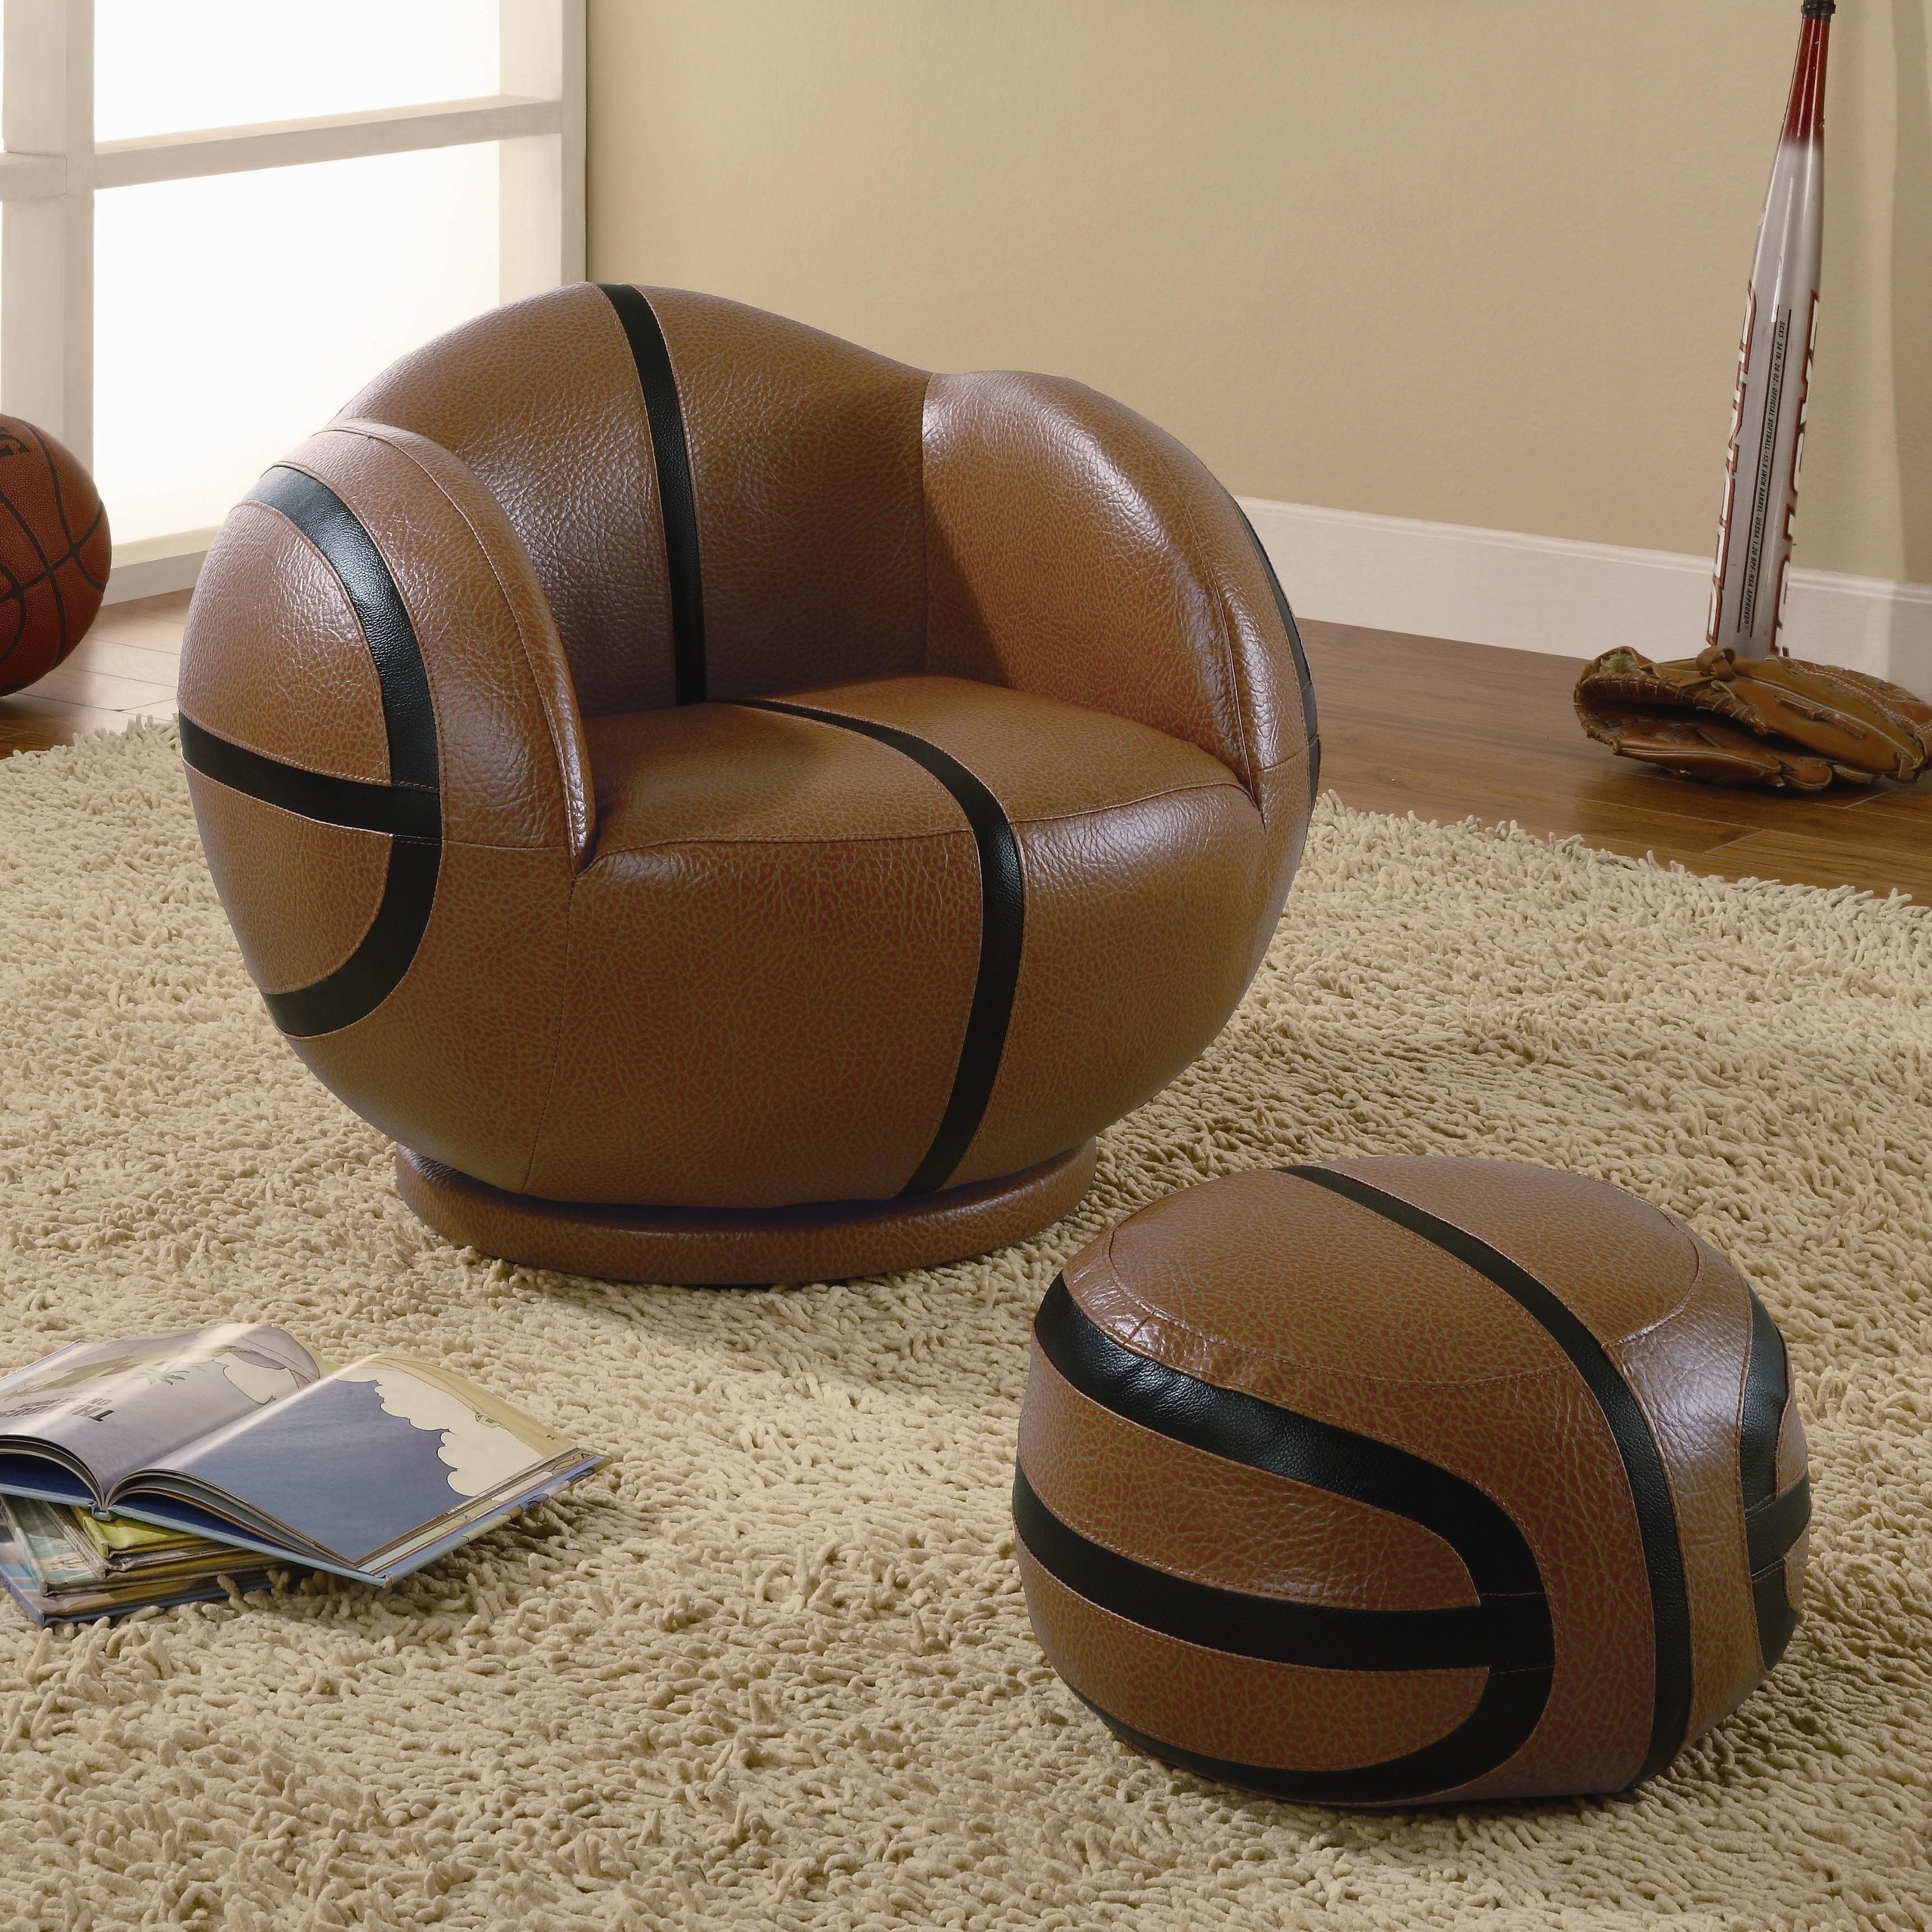 Kids sports chairs small kids basketball chair and ottoman